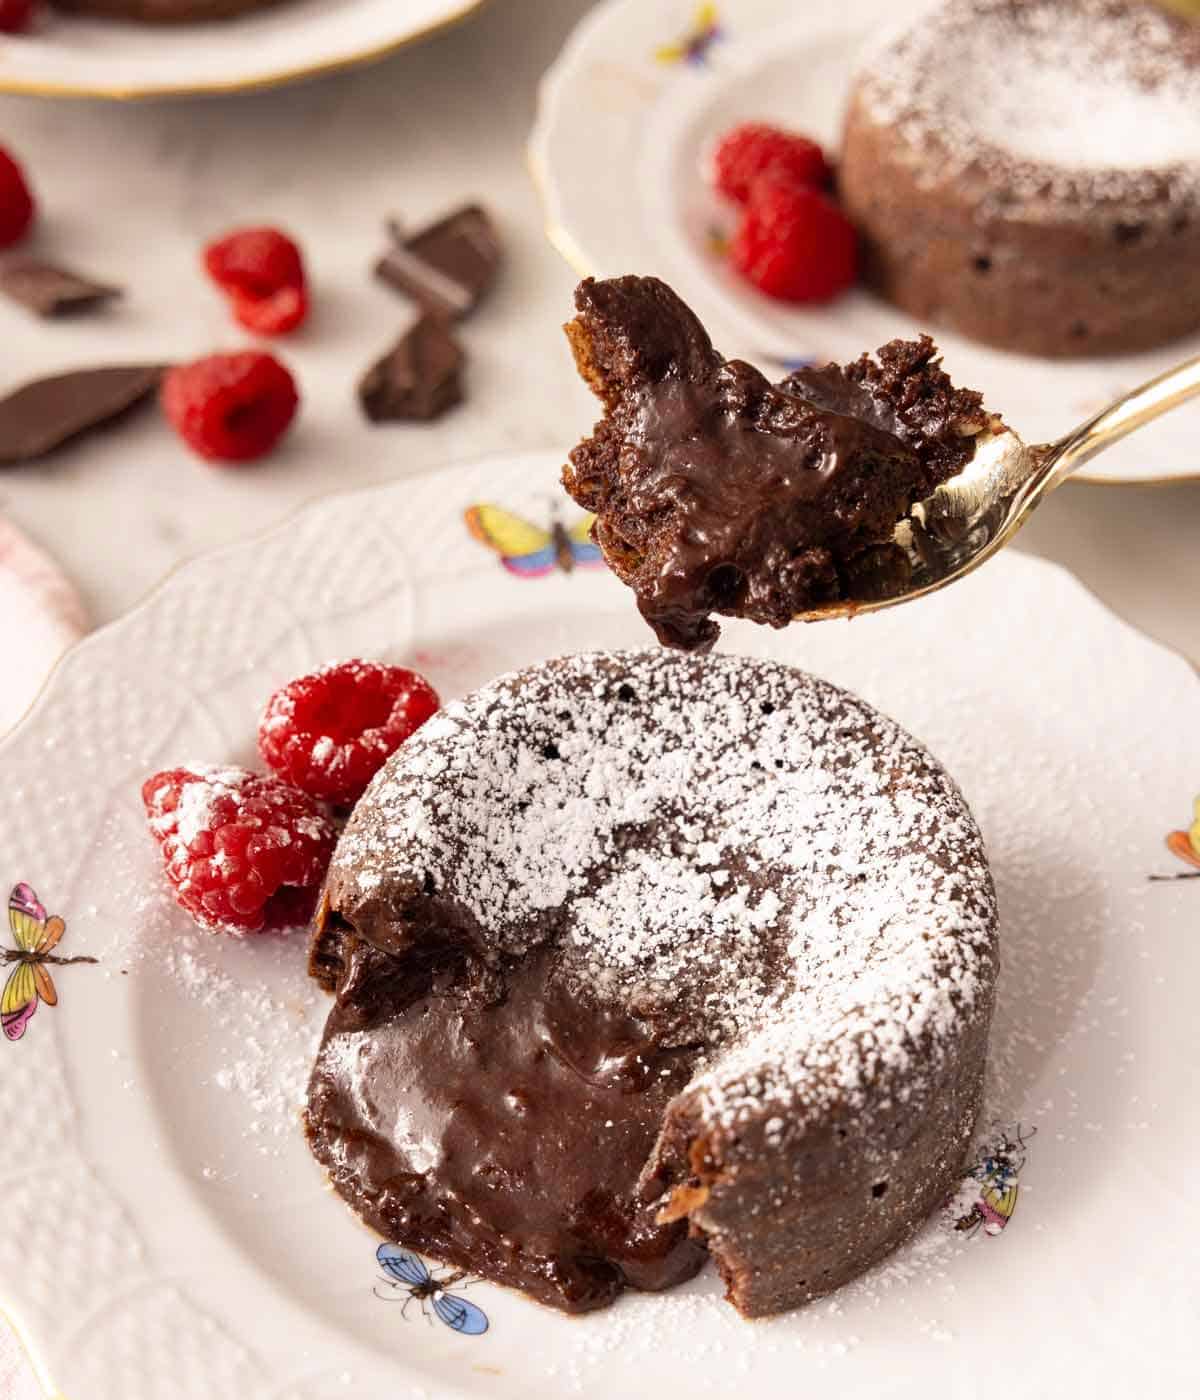 A chocolate lava cake on a plate with a spoonful lifted up.